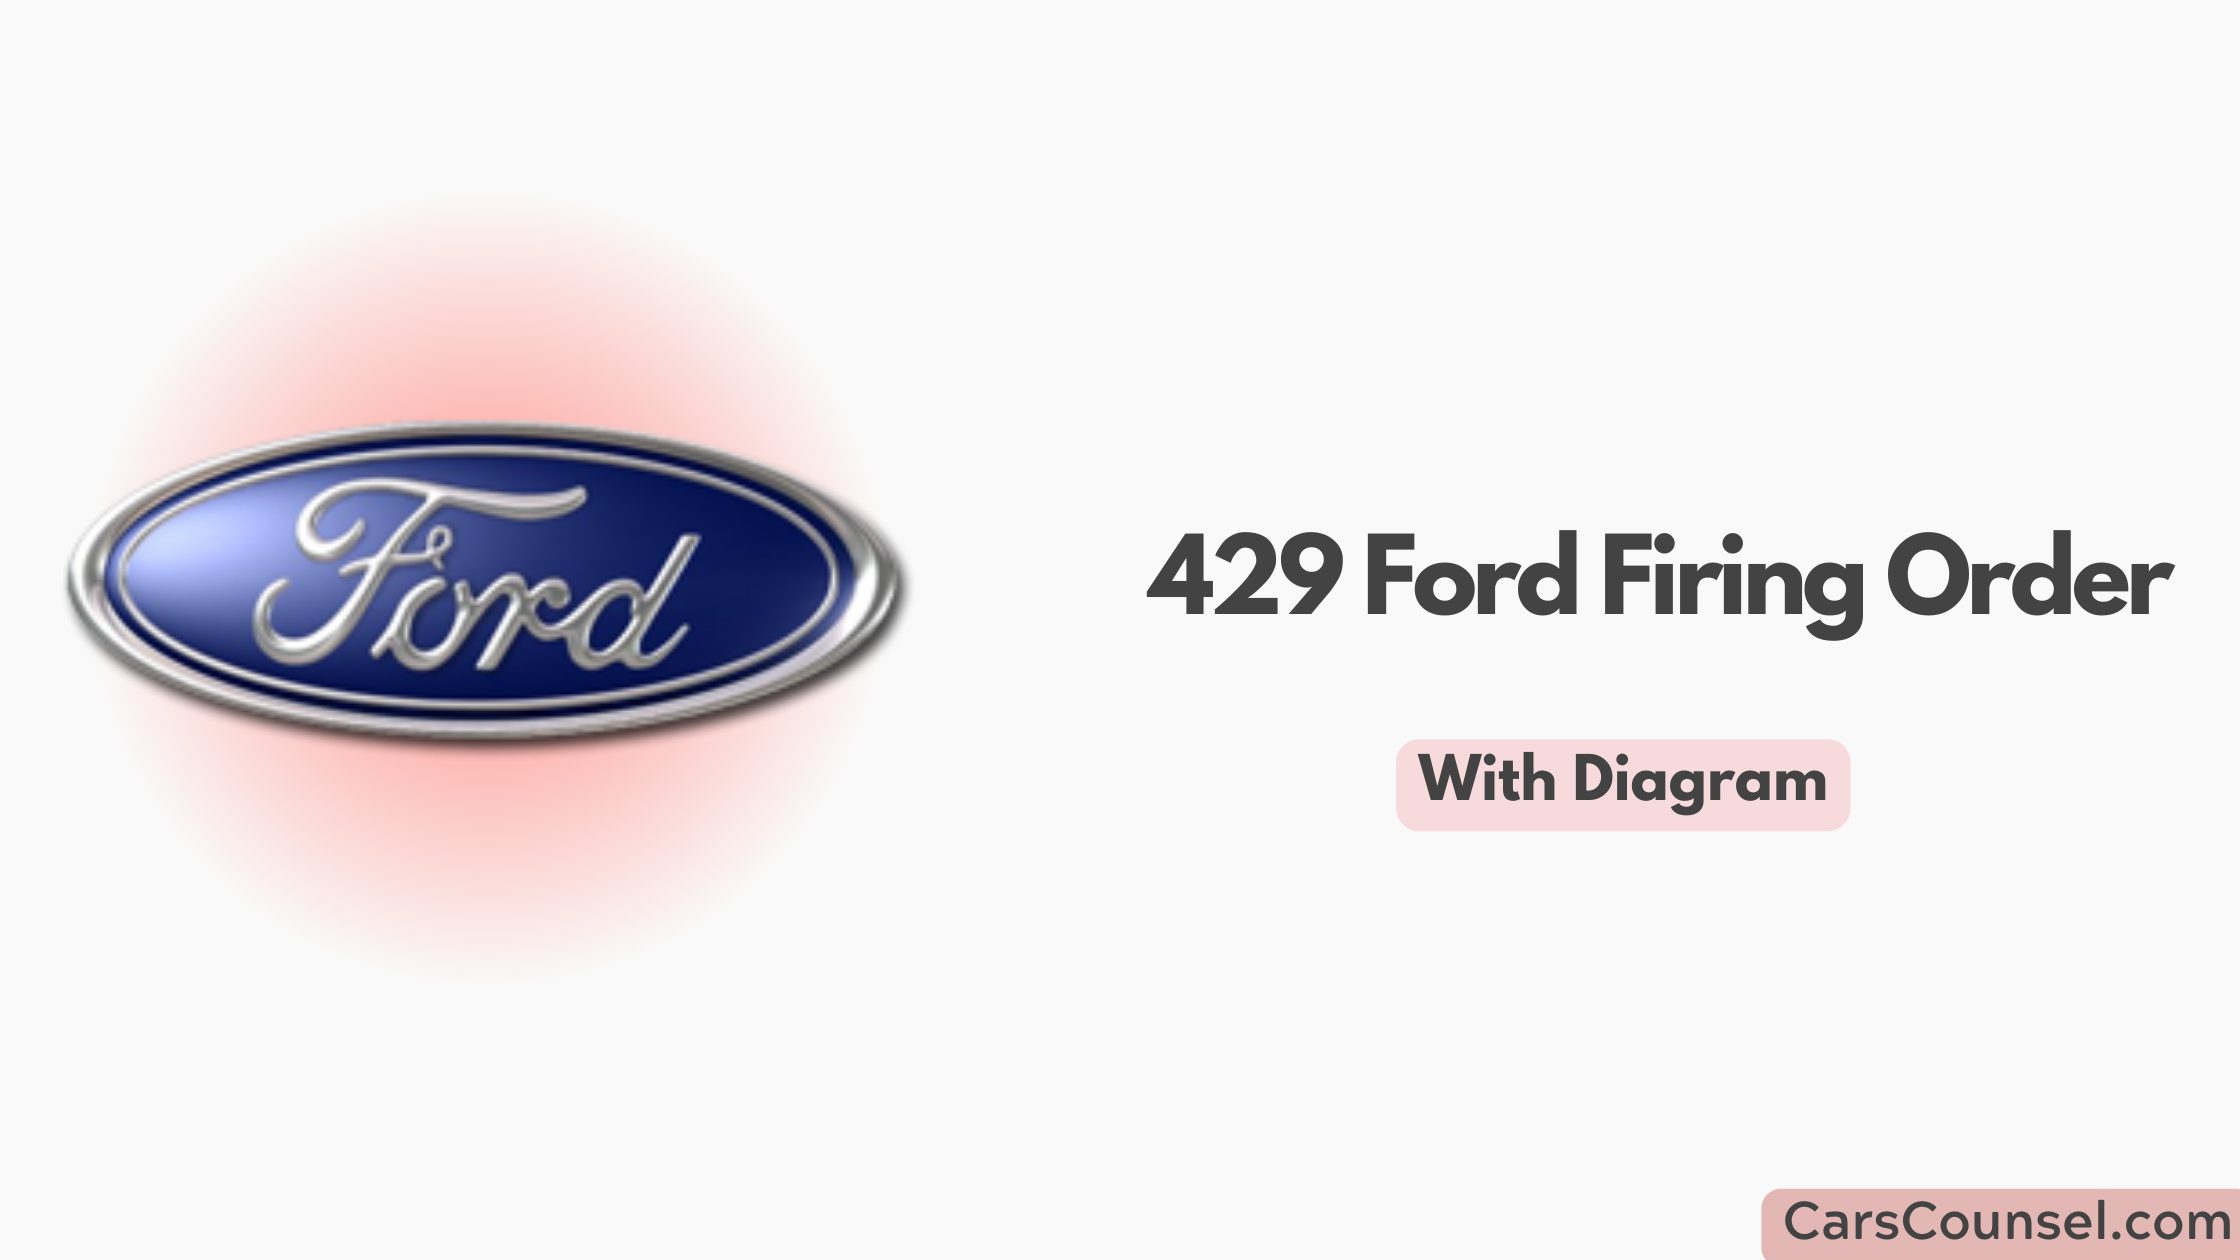 429 Ford Firing Order With Diagram